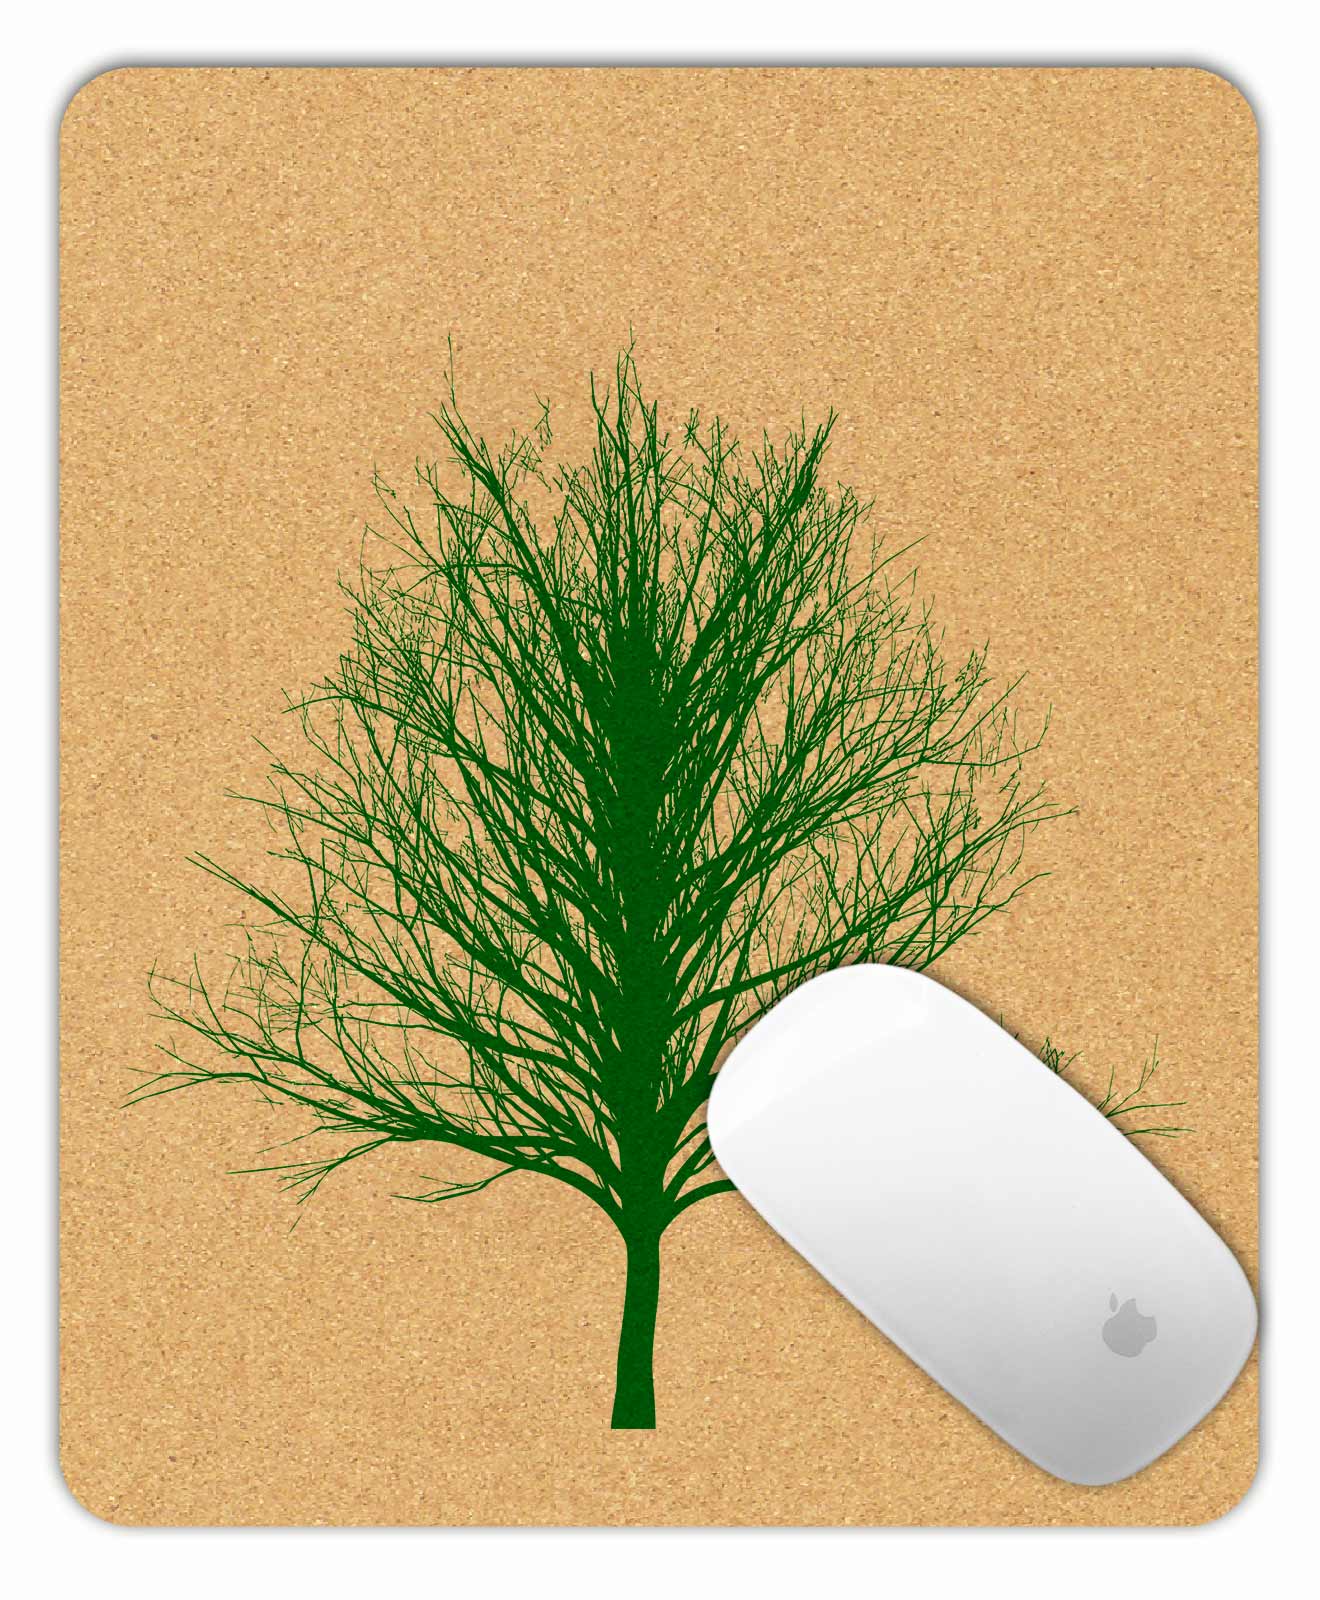 Mouse Pad Winter Tree